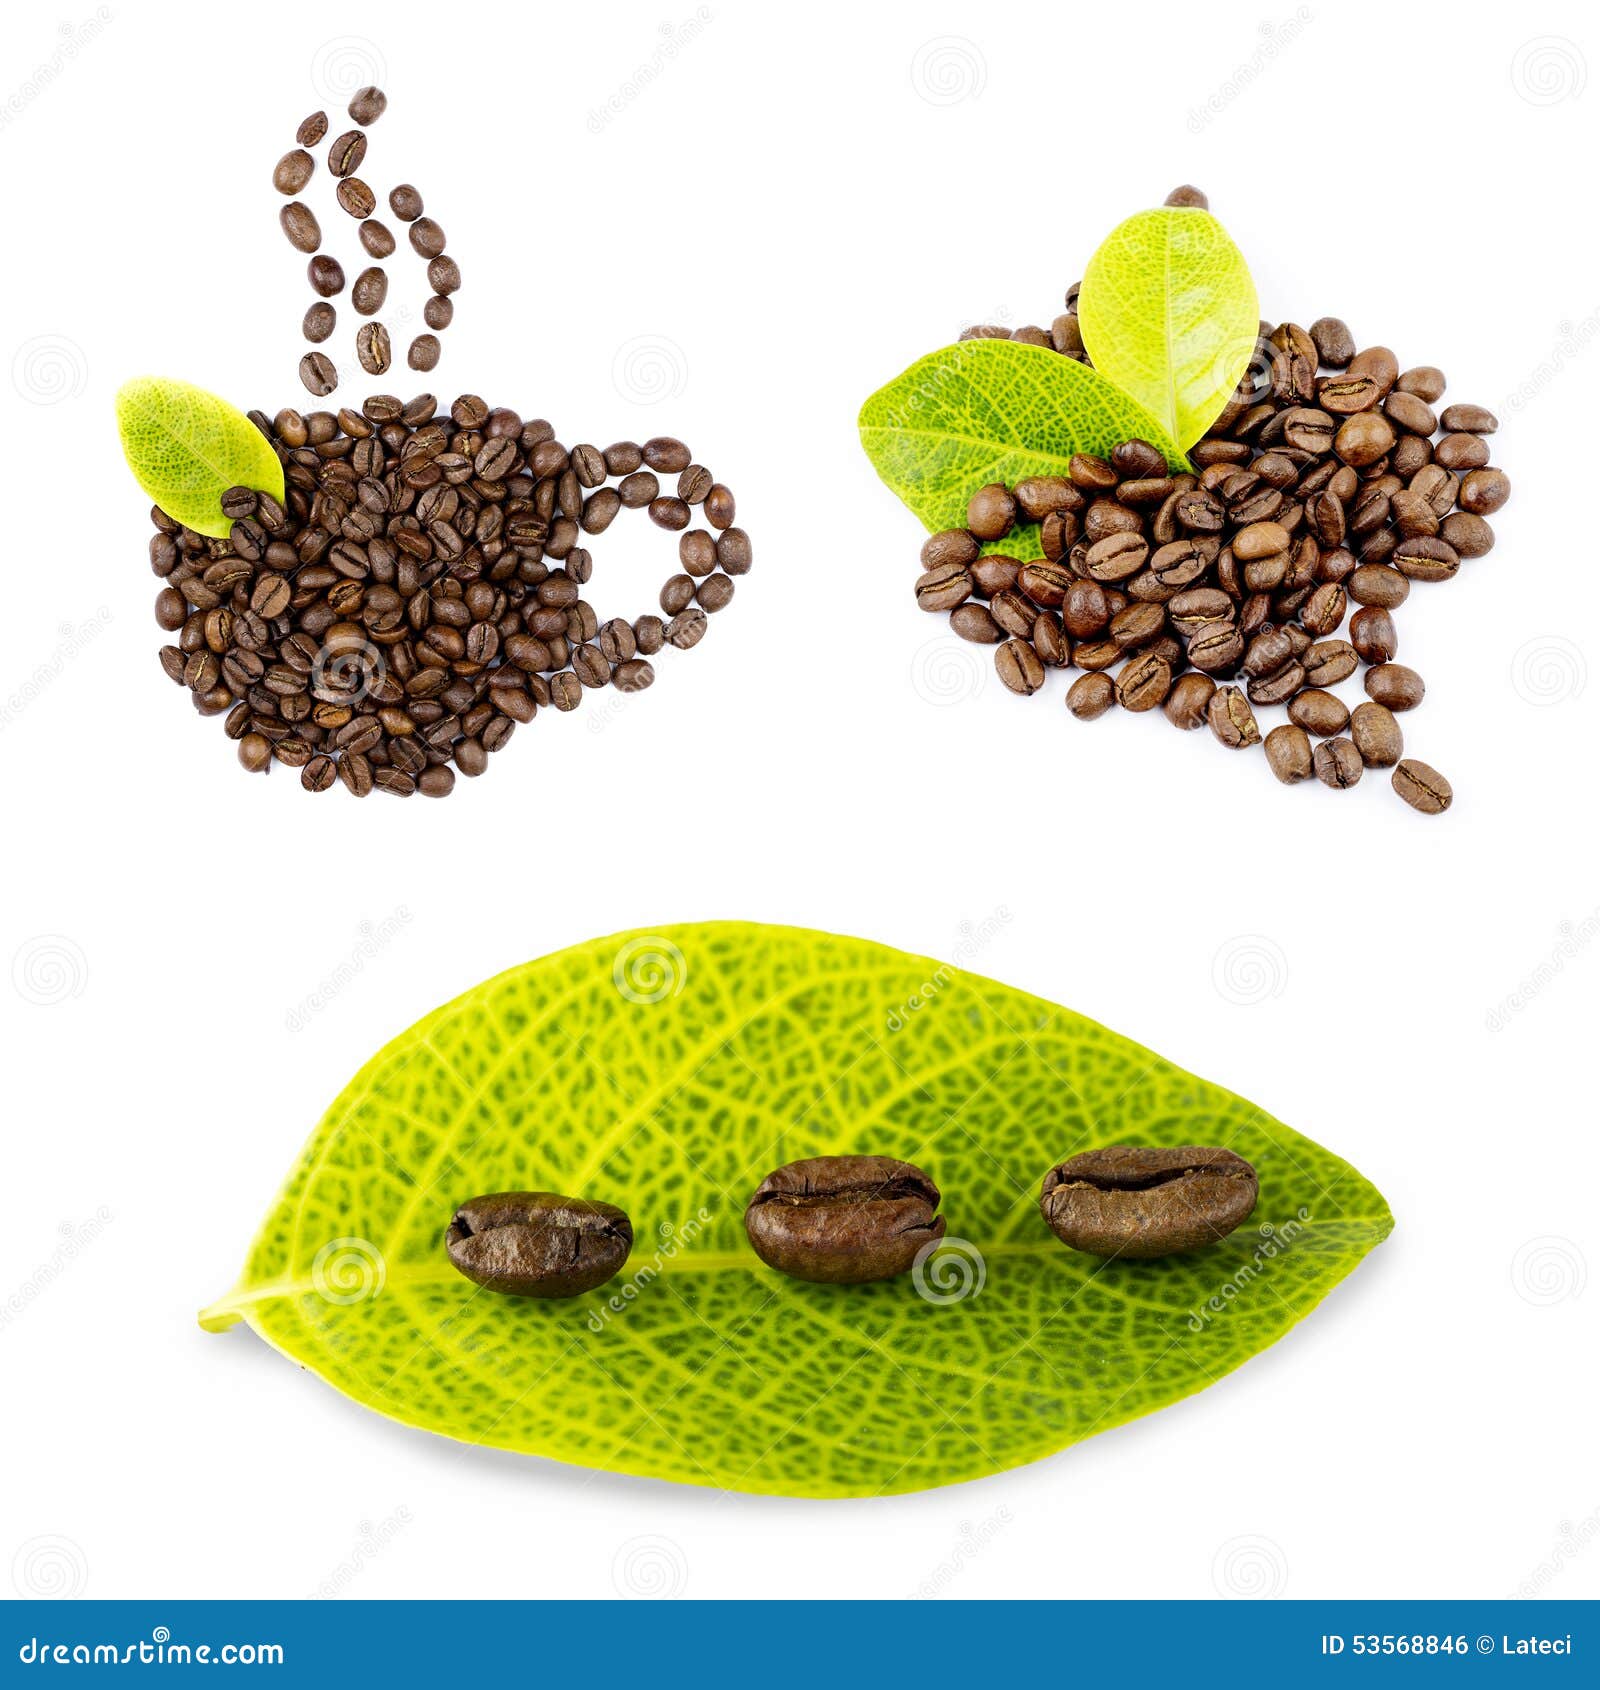 coffee beans collage  on white bacground